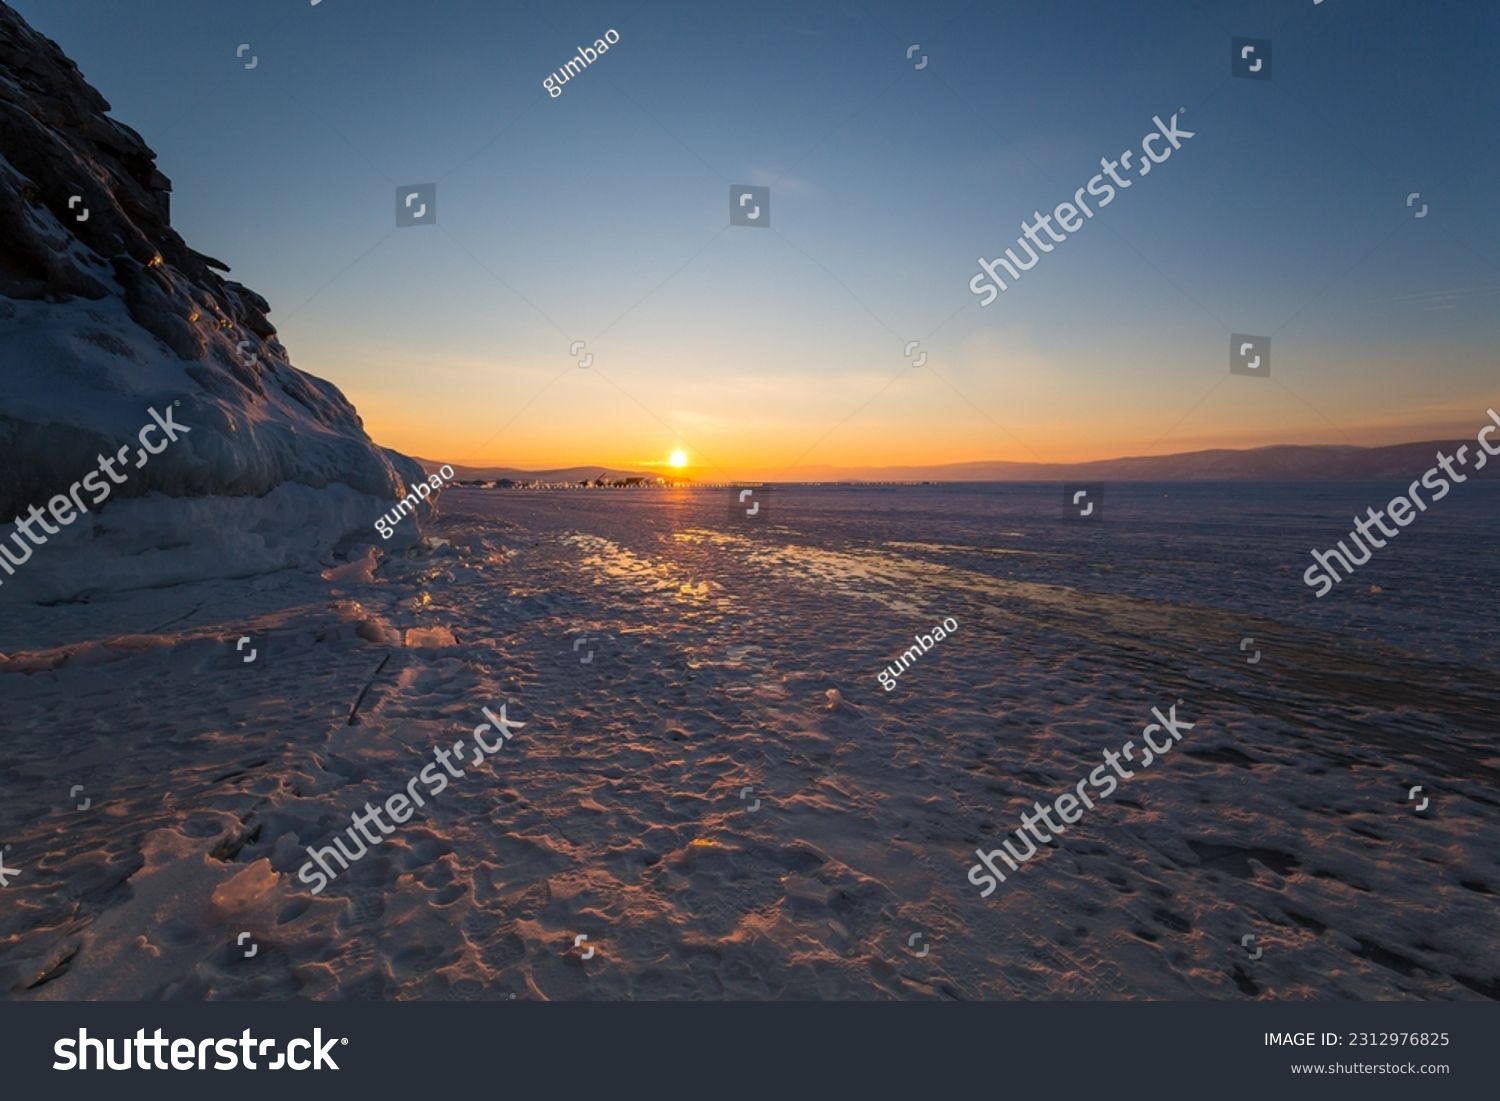 Coast of lake Baikal in winter, the deepest and largest freshwater lake by volume in the world, located in southern Siberia, Russia #2312976825